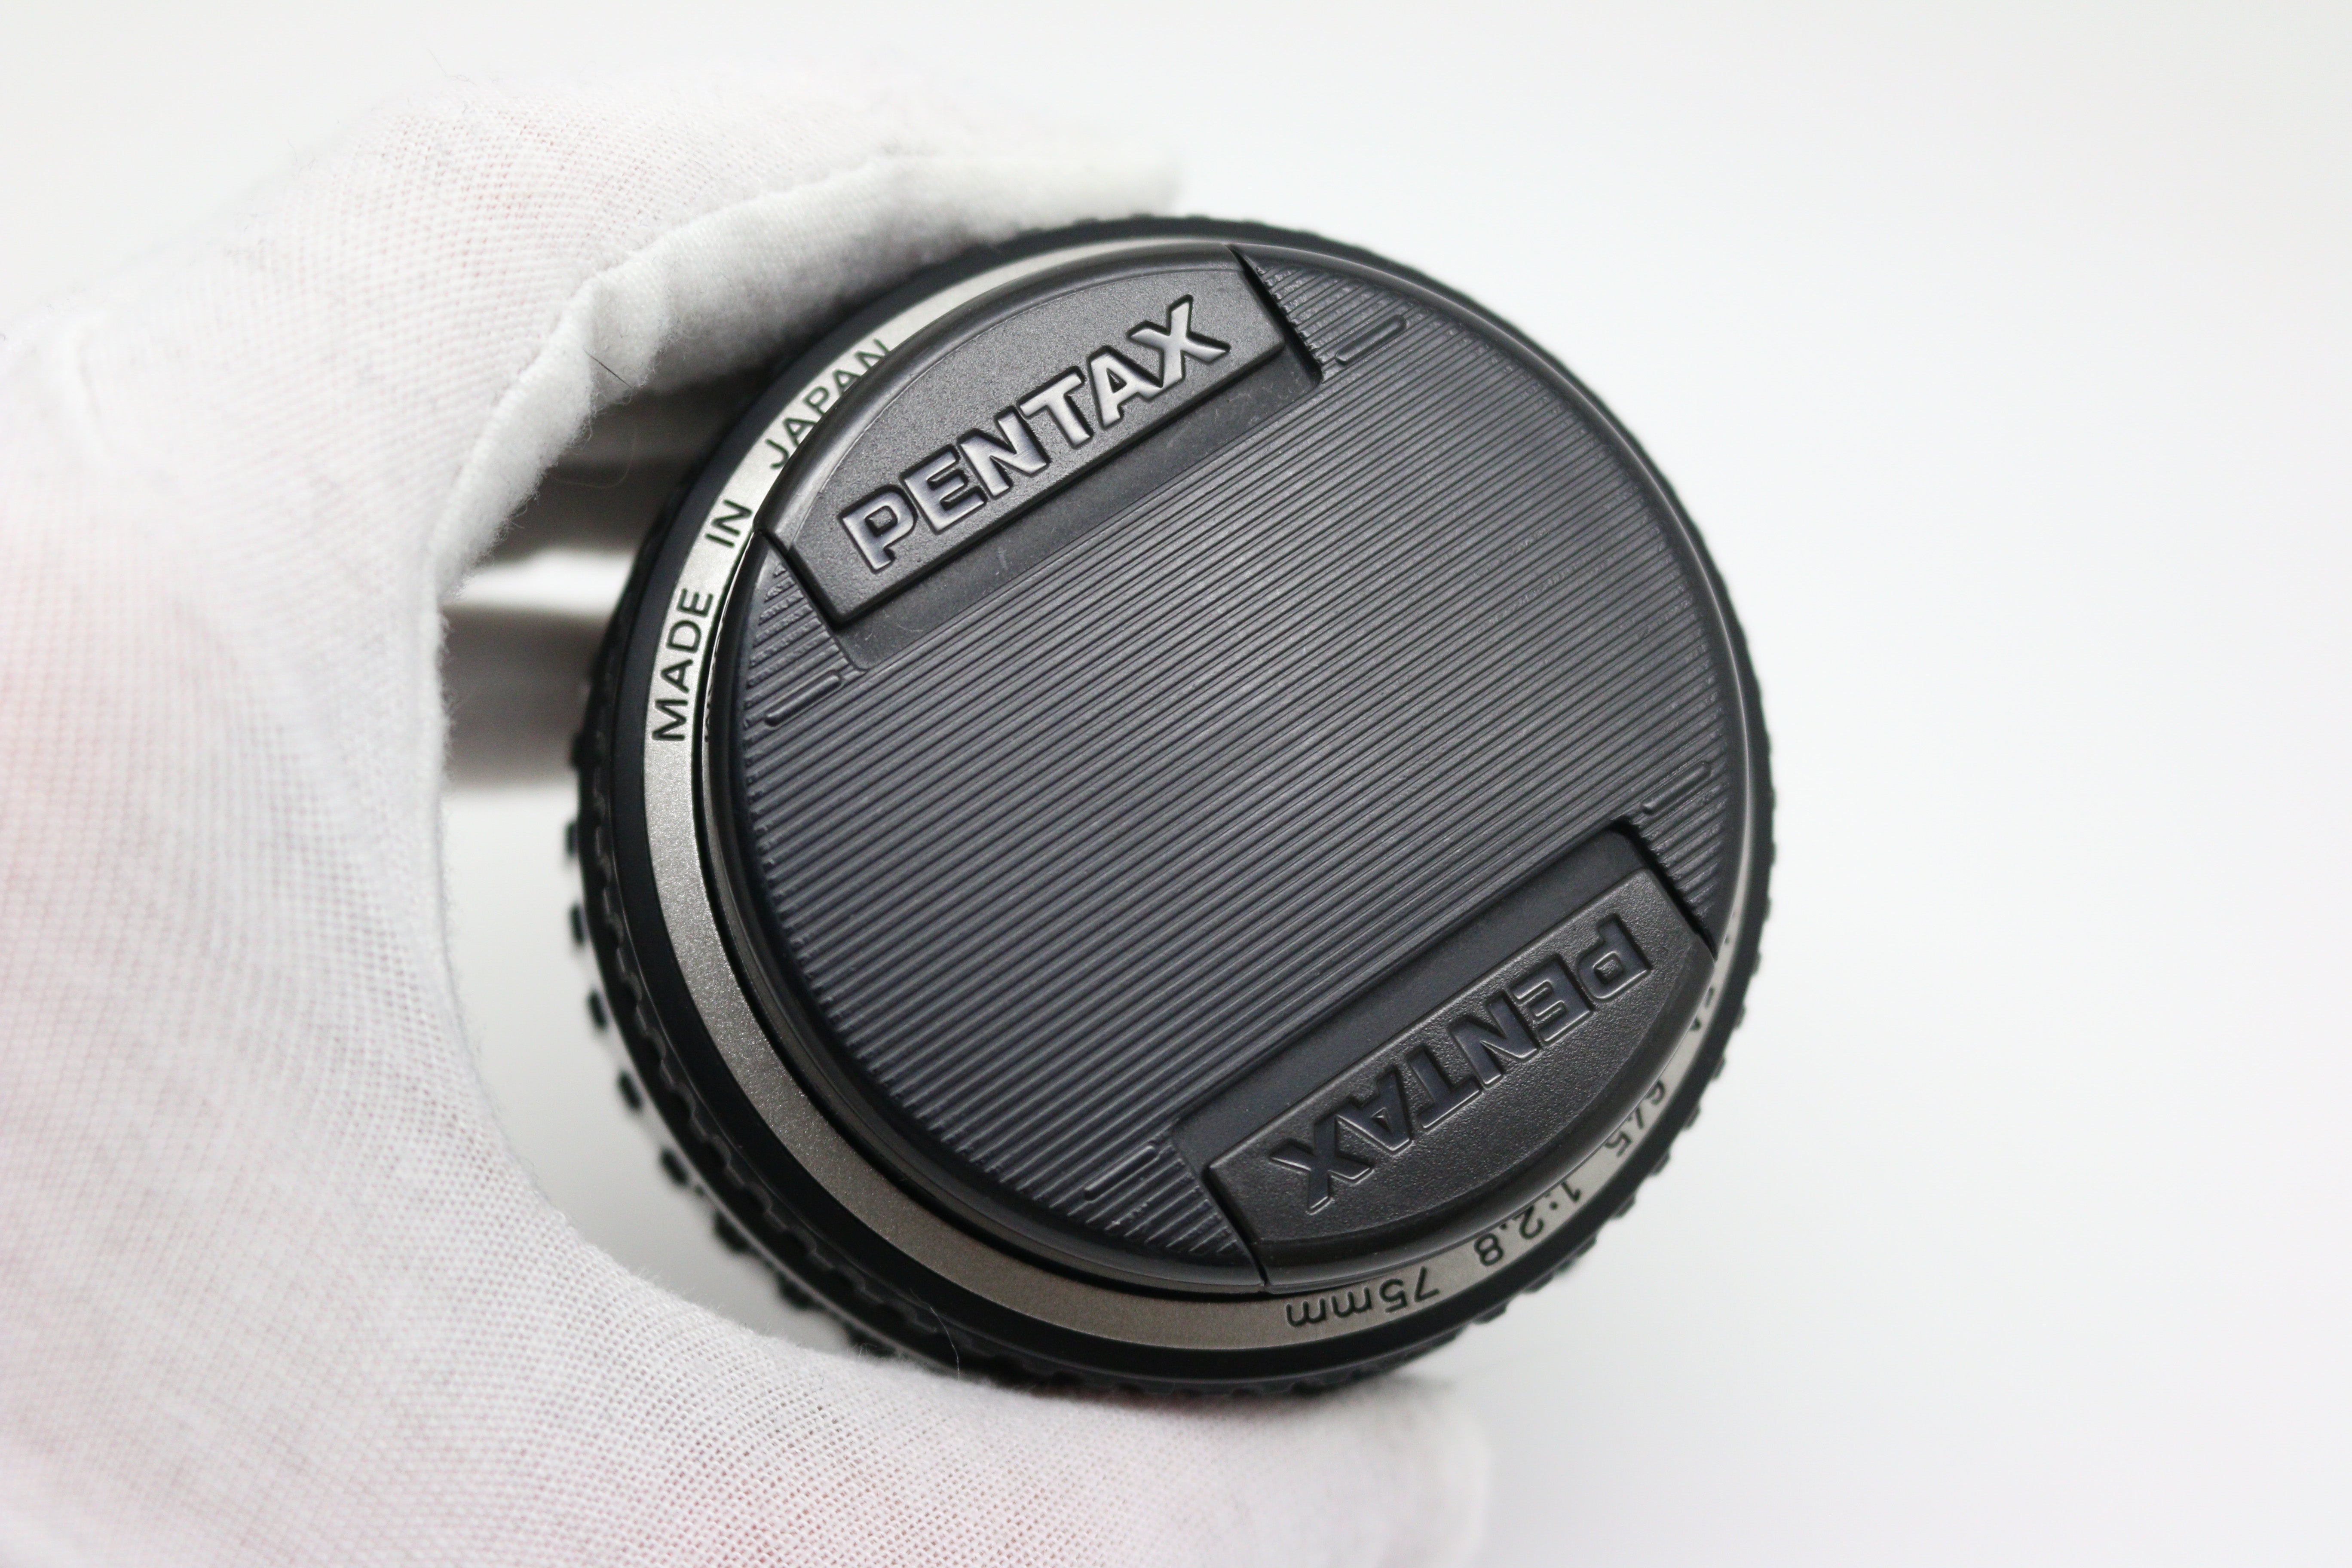 Pentax 645N with SMC 75MM F/2.8 FA Lens